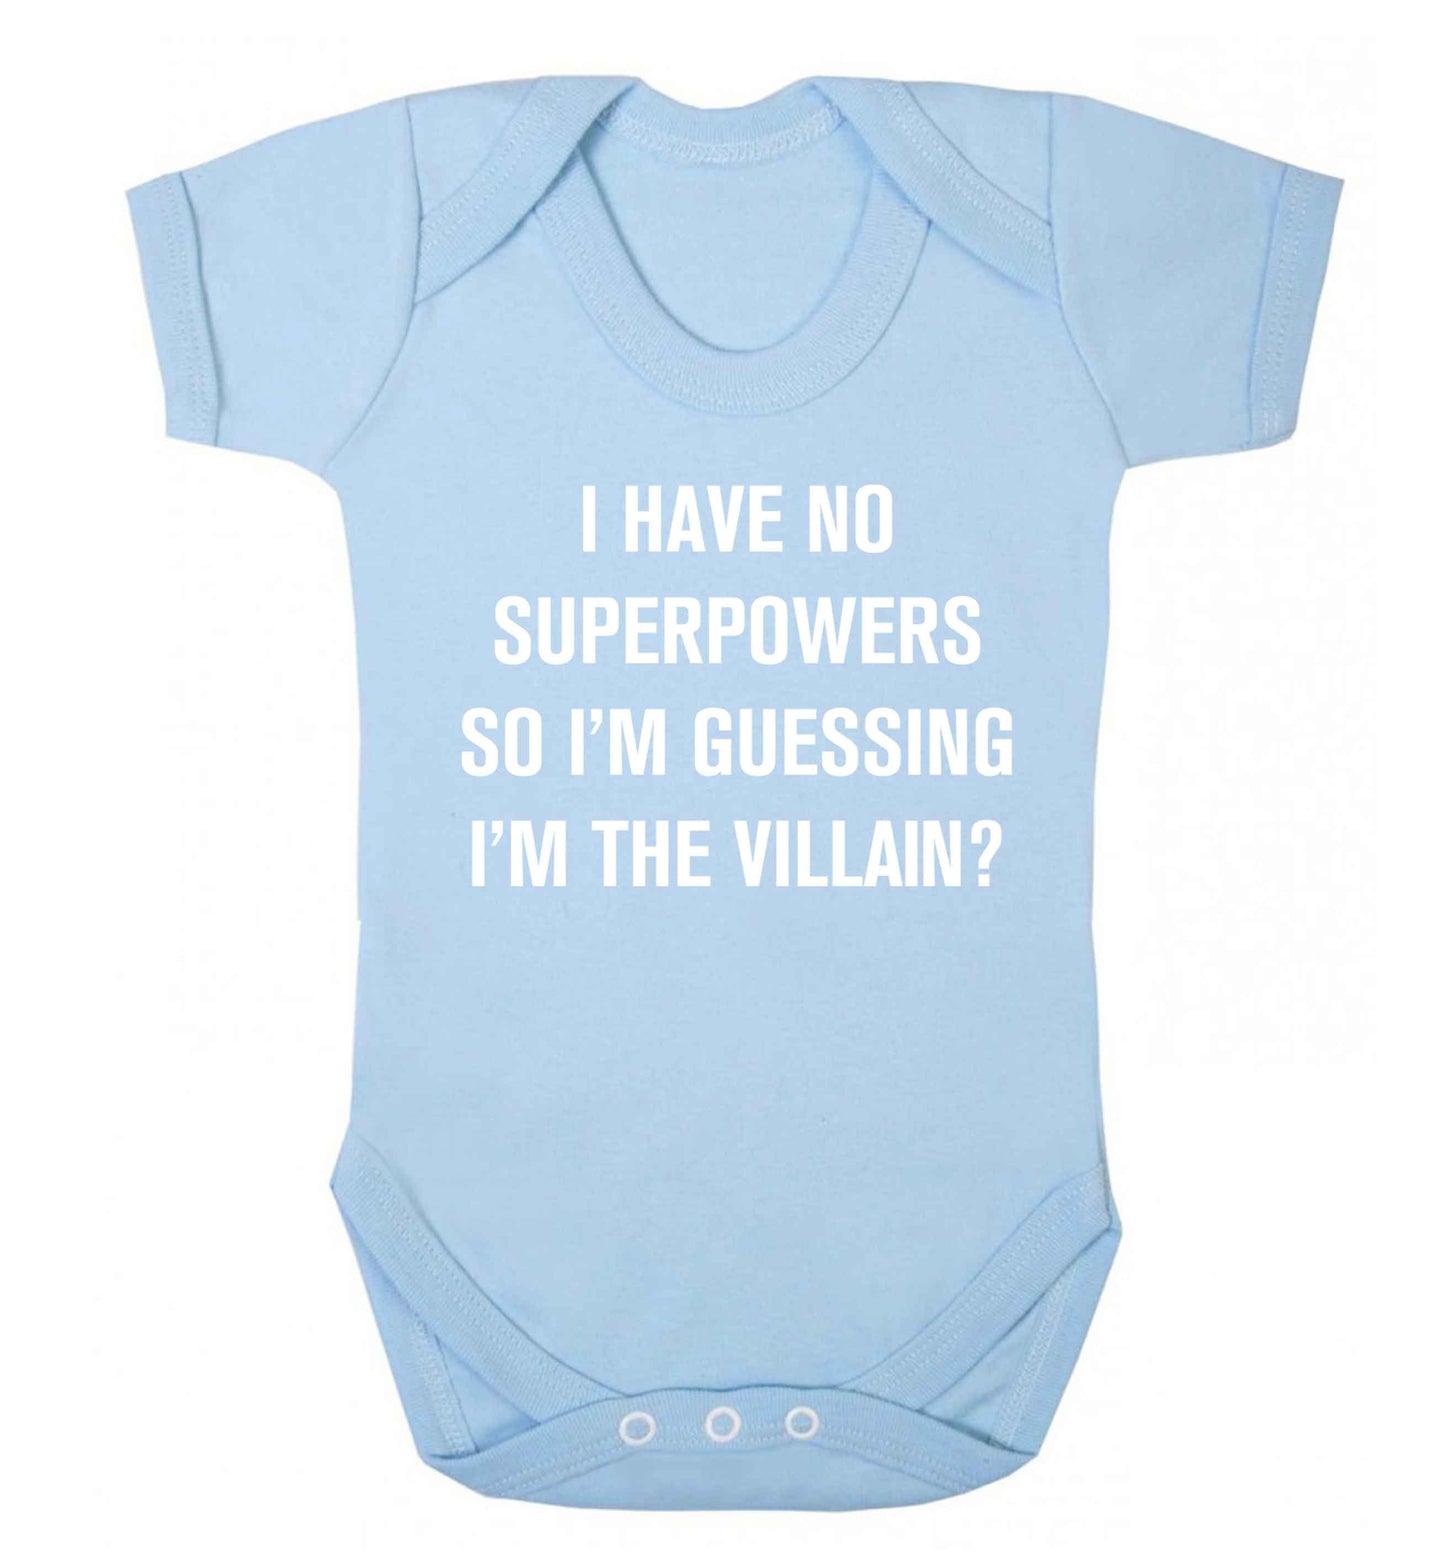 I have no superpowers so I'm guessing I'm the villain? Baby Vest pale blue 18-24 months